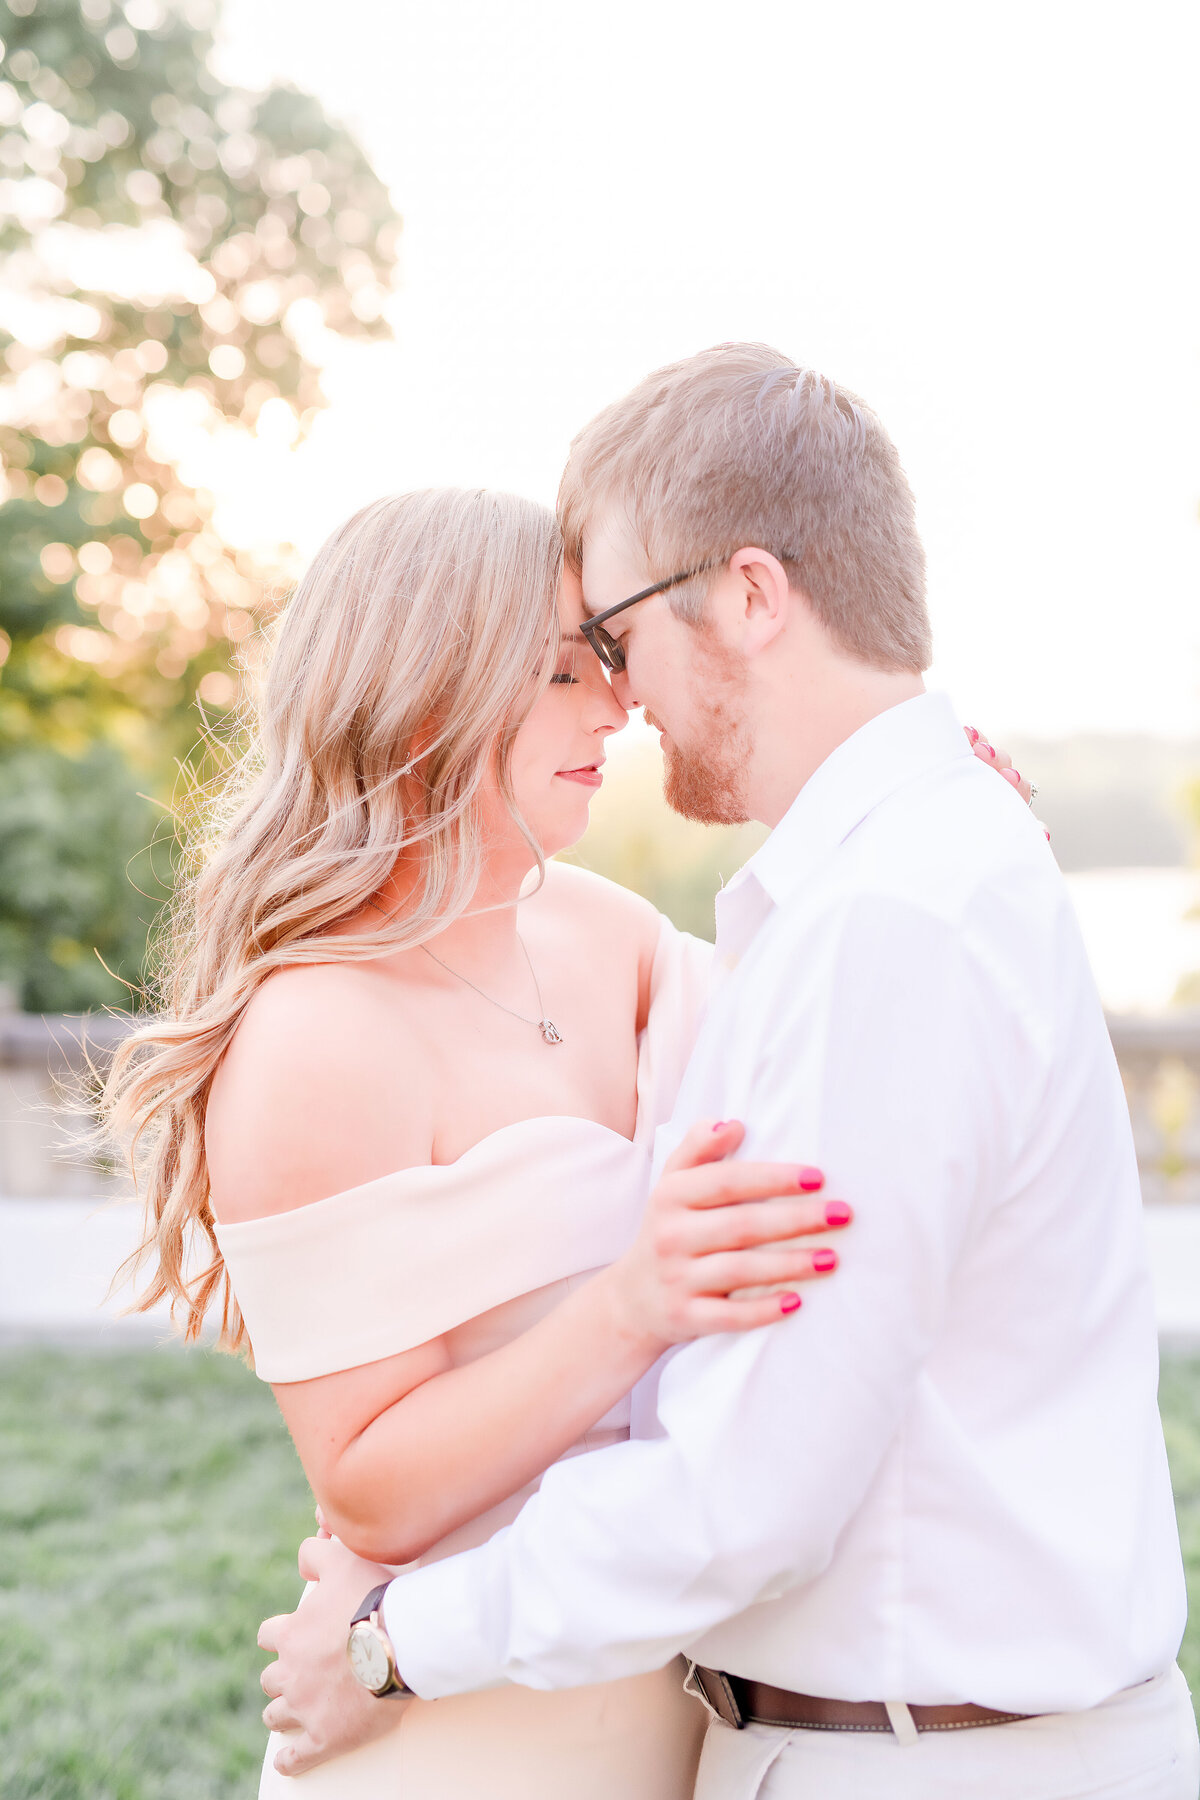 light-and-airy-engagement-photography-in-indianapolis